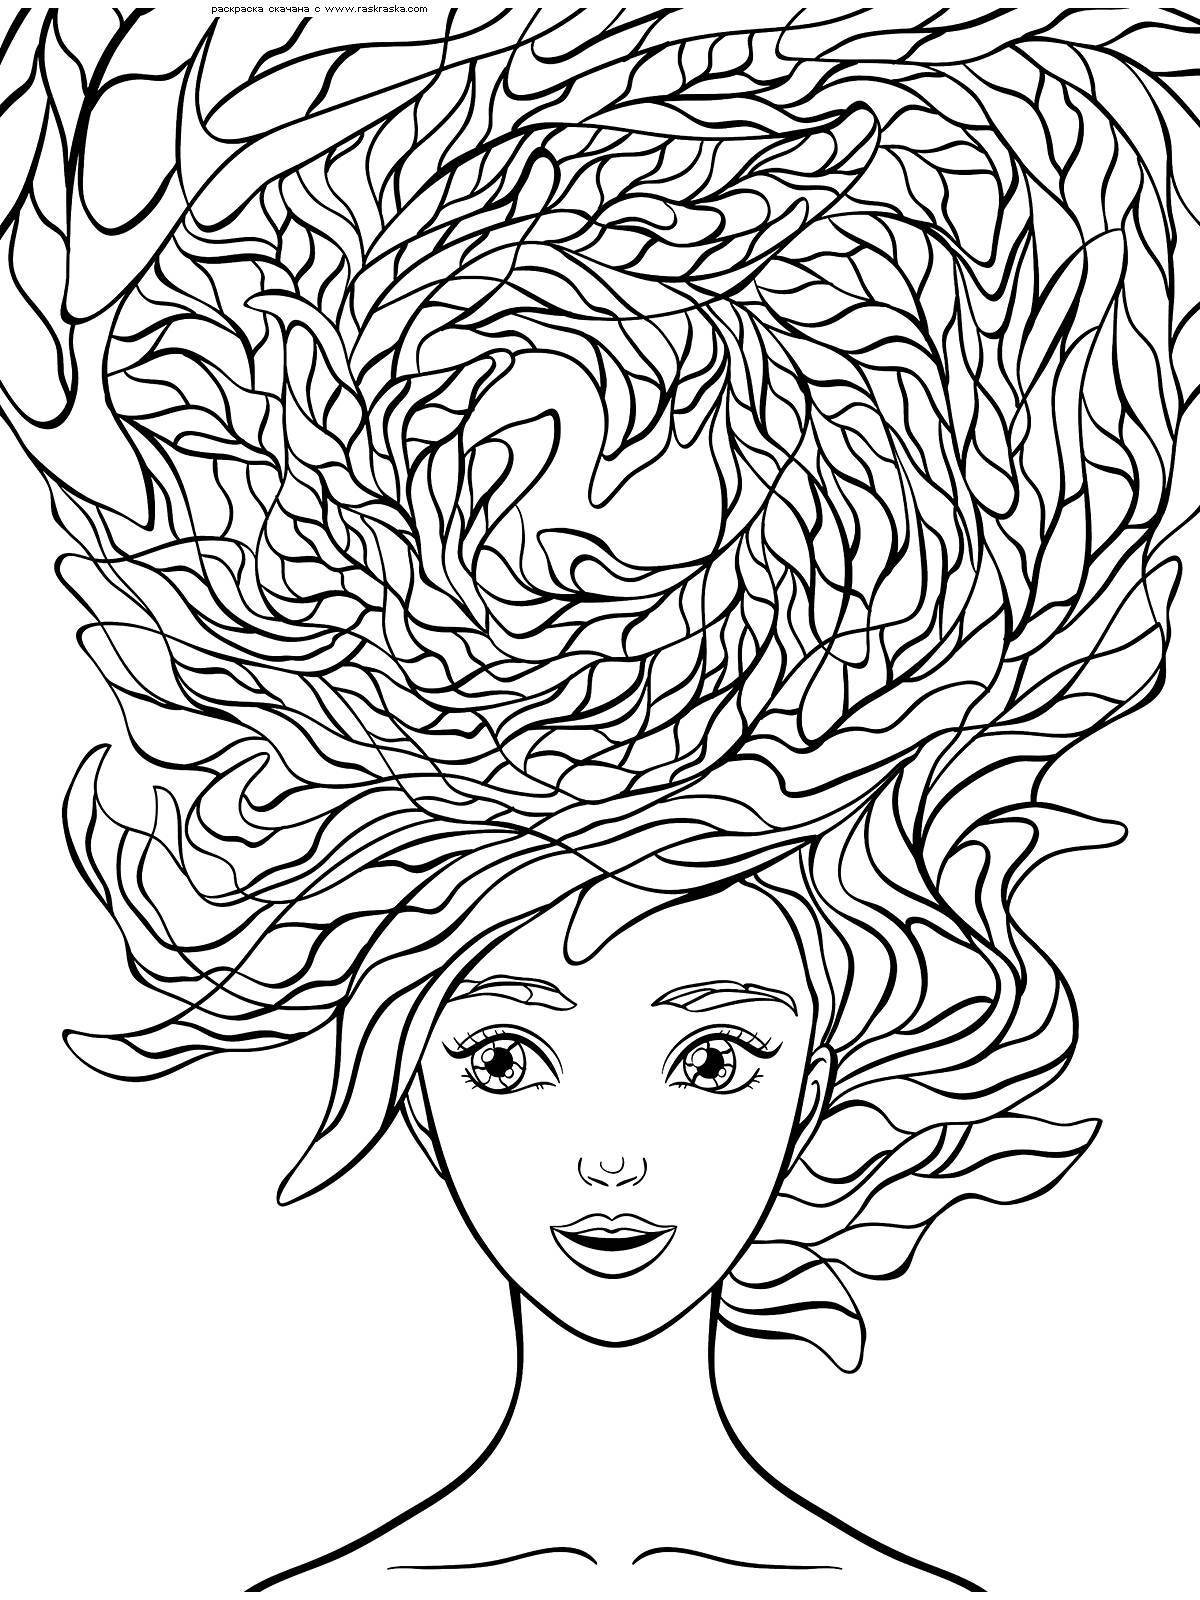 Furry hair coloring page